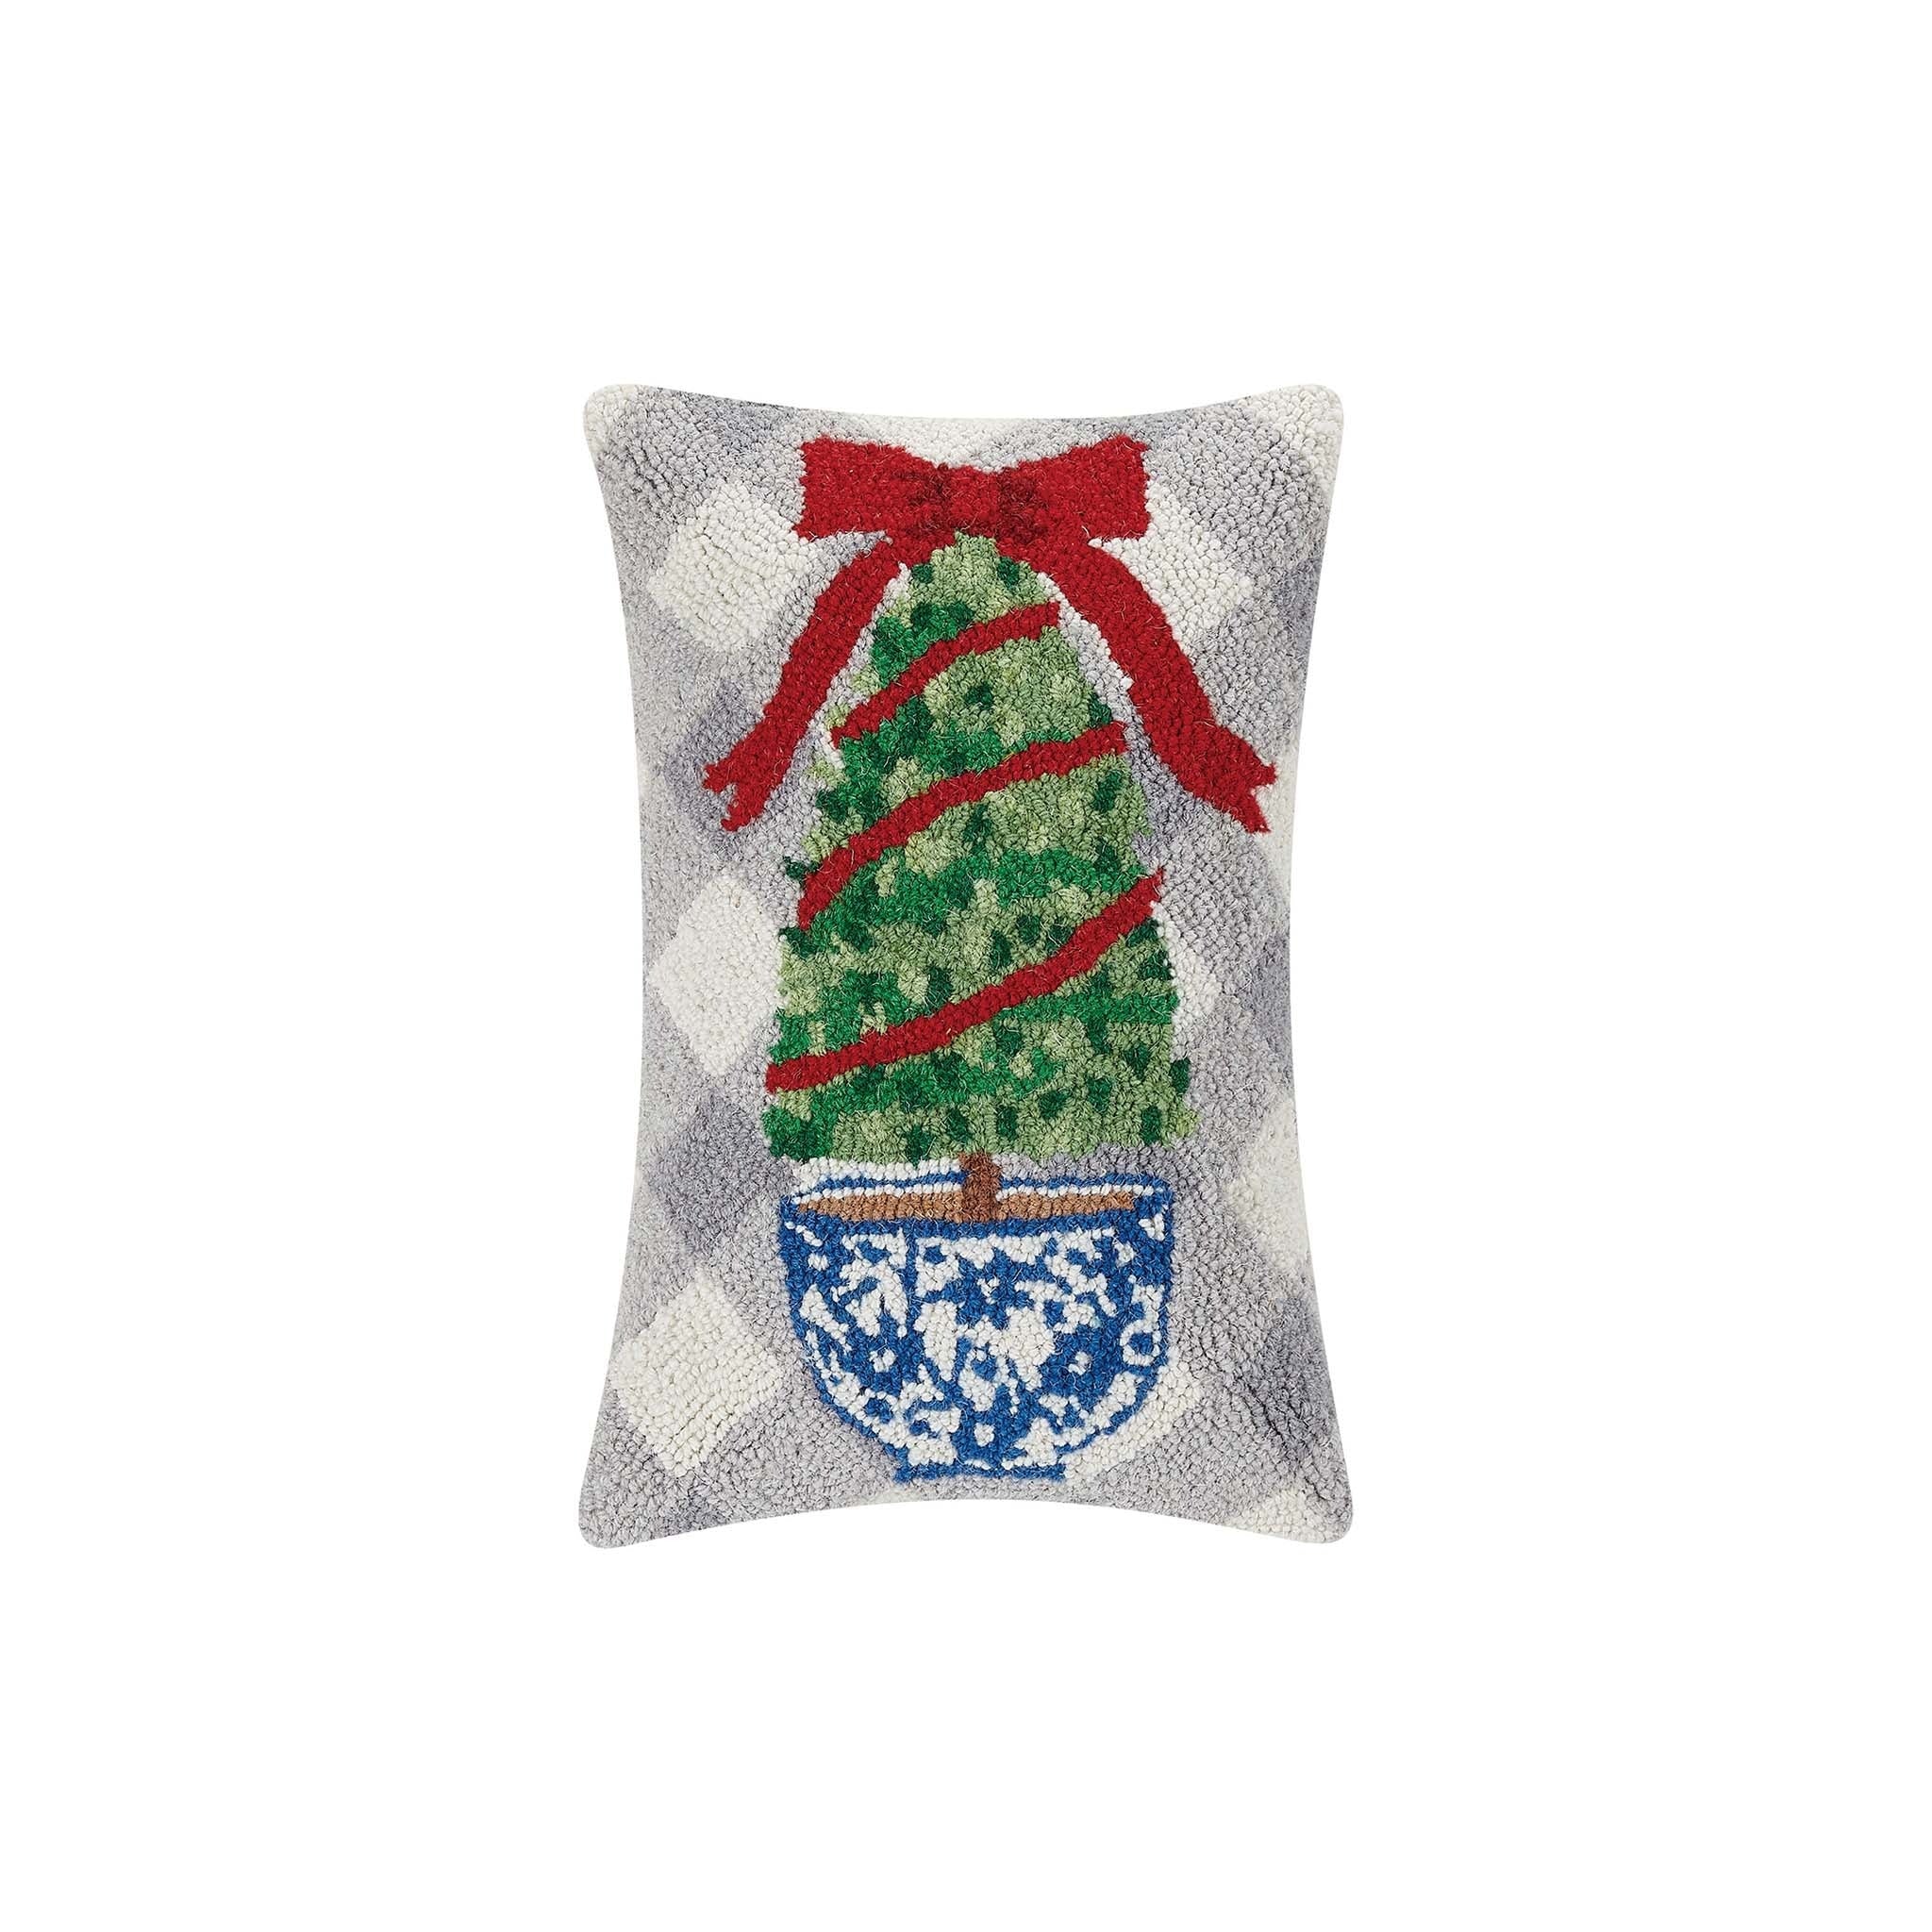 Festive Topiary and Chinoiserie Pot Hooked Throw Pillow